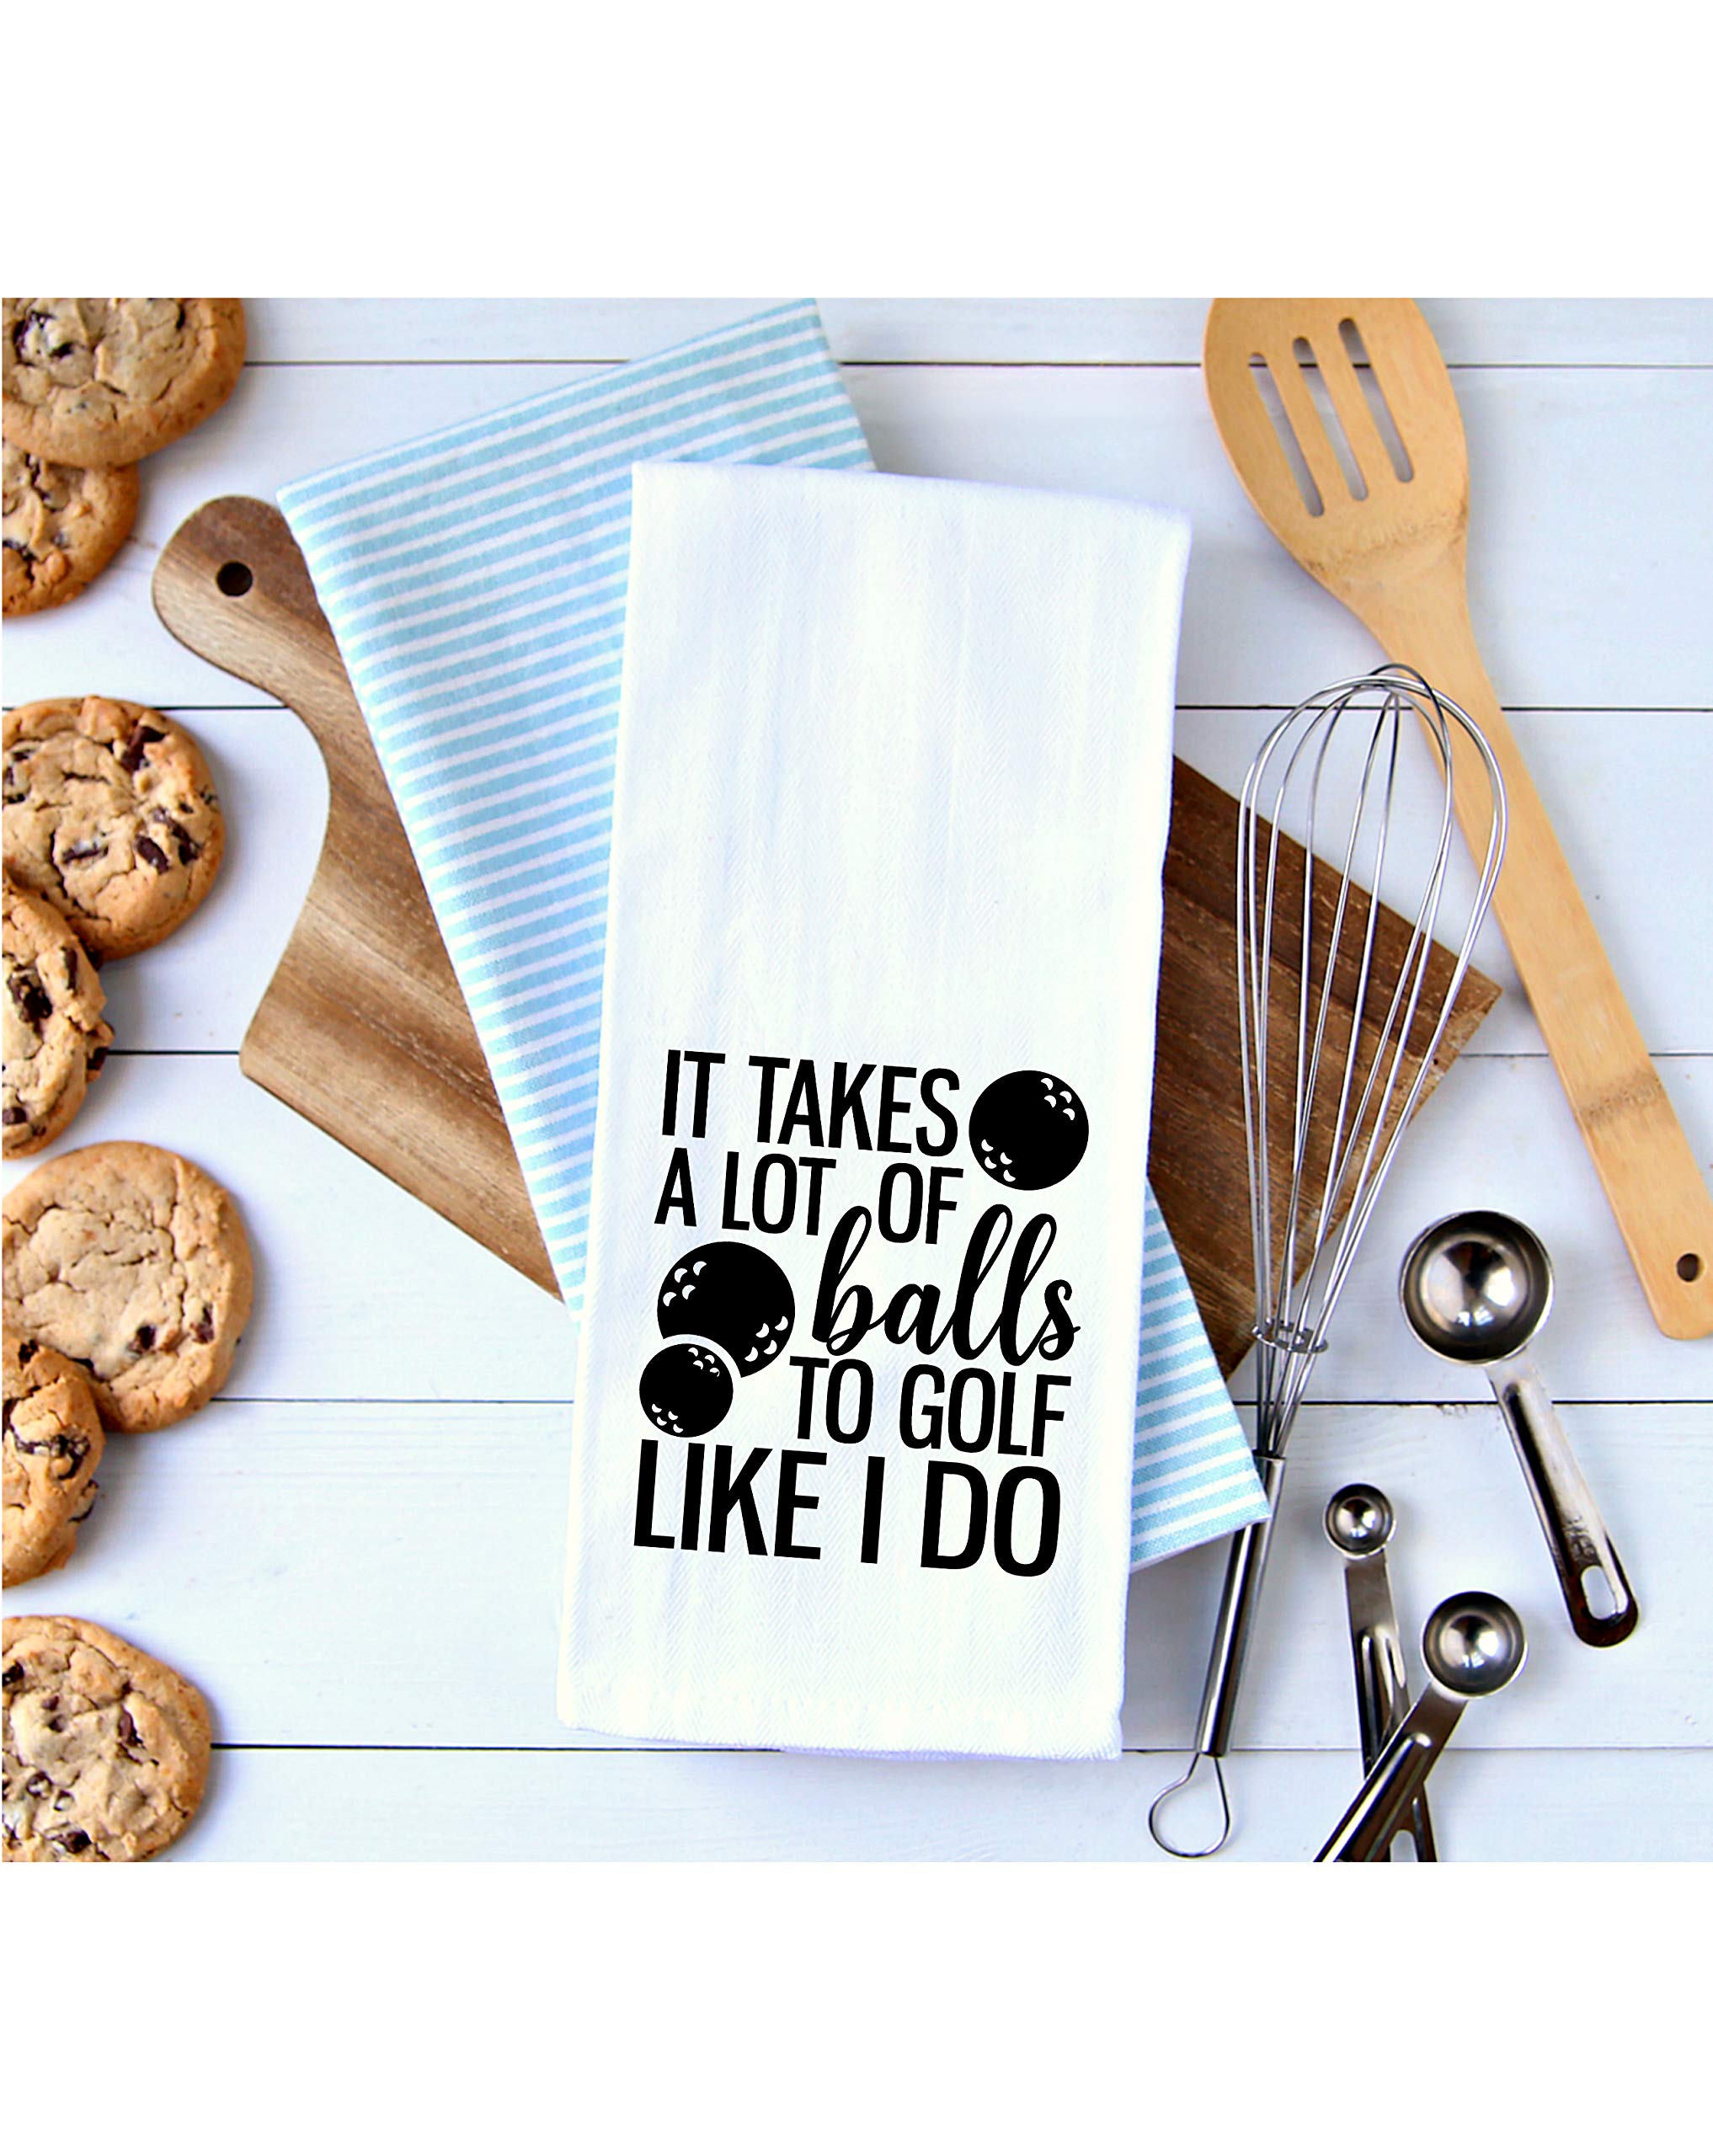 It Takes a lot of Balls to Golf Like i do -Dish Towel Kitchen Tea Towel Funny Saying Humorous Flour Sack Towels Great Housewarming Gift 28 inch by 28 inch, 100% Cotton, Multi-Purpose Towel